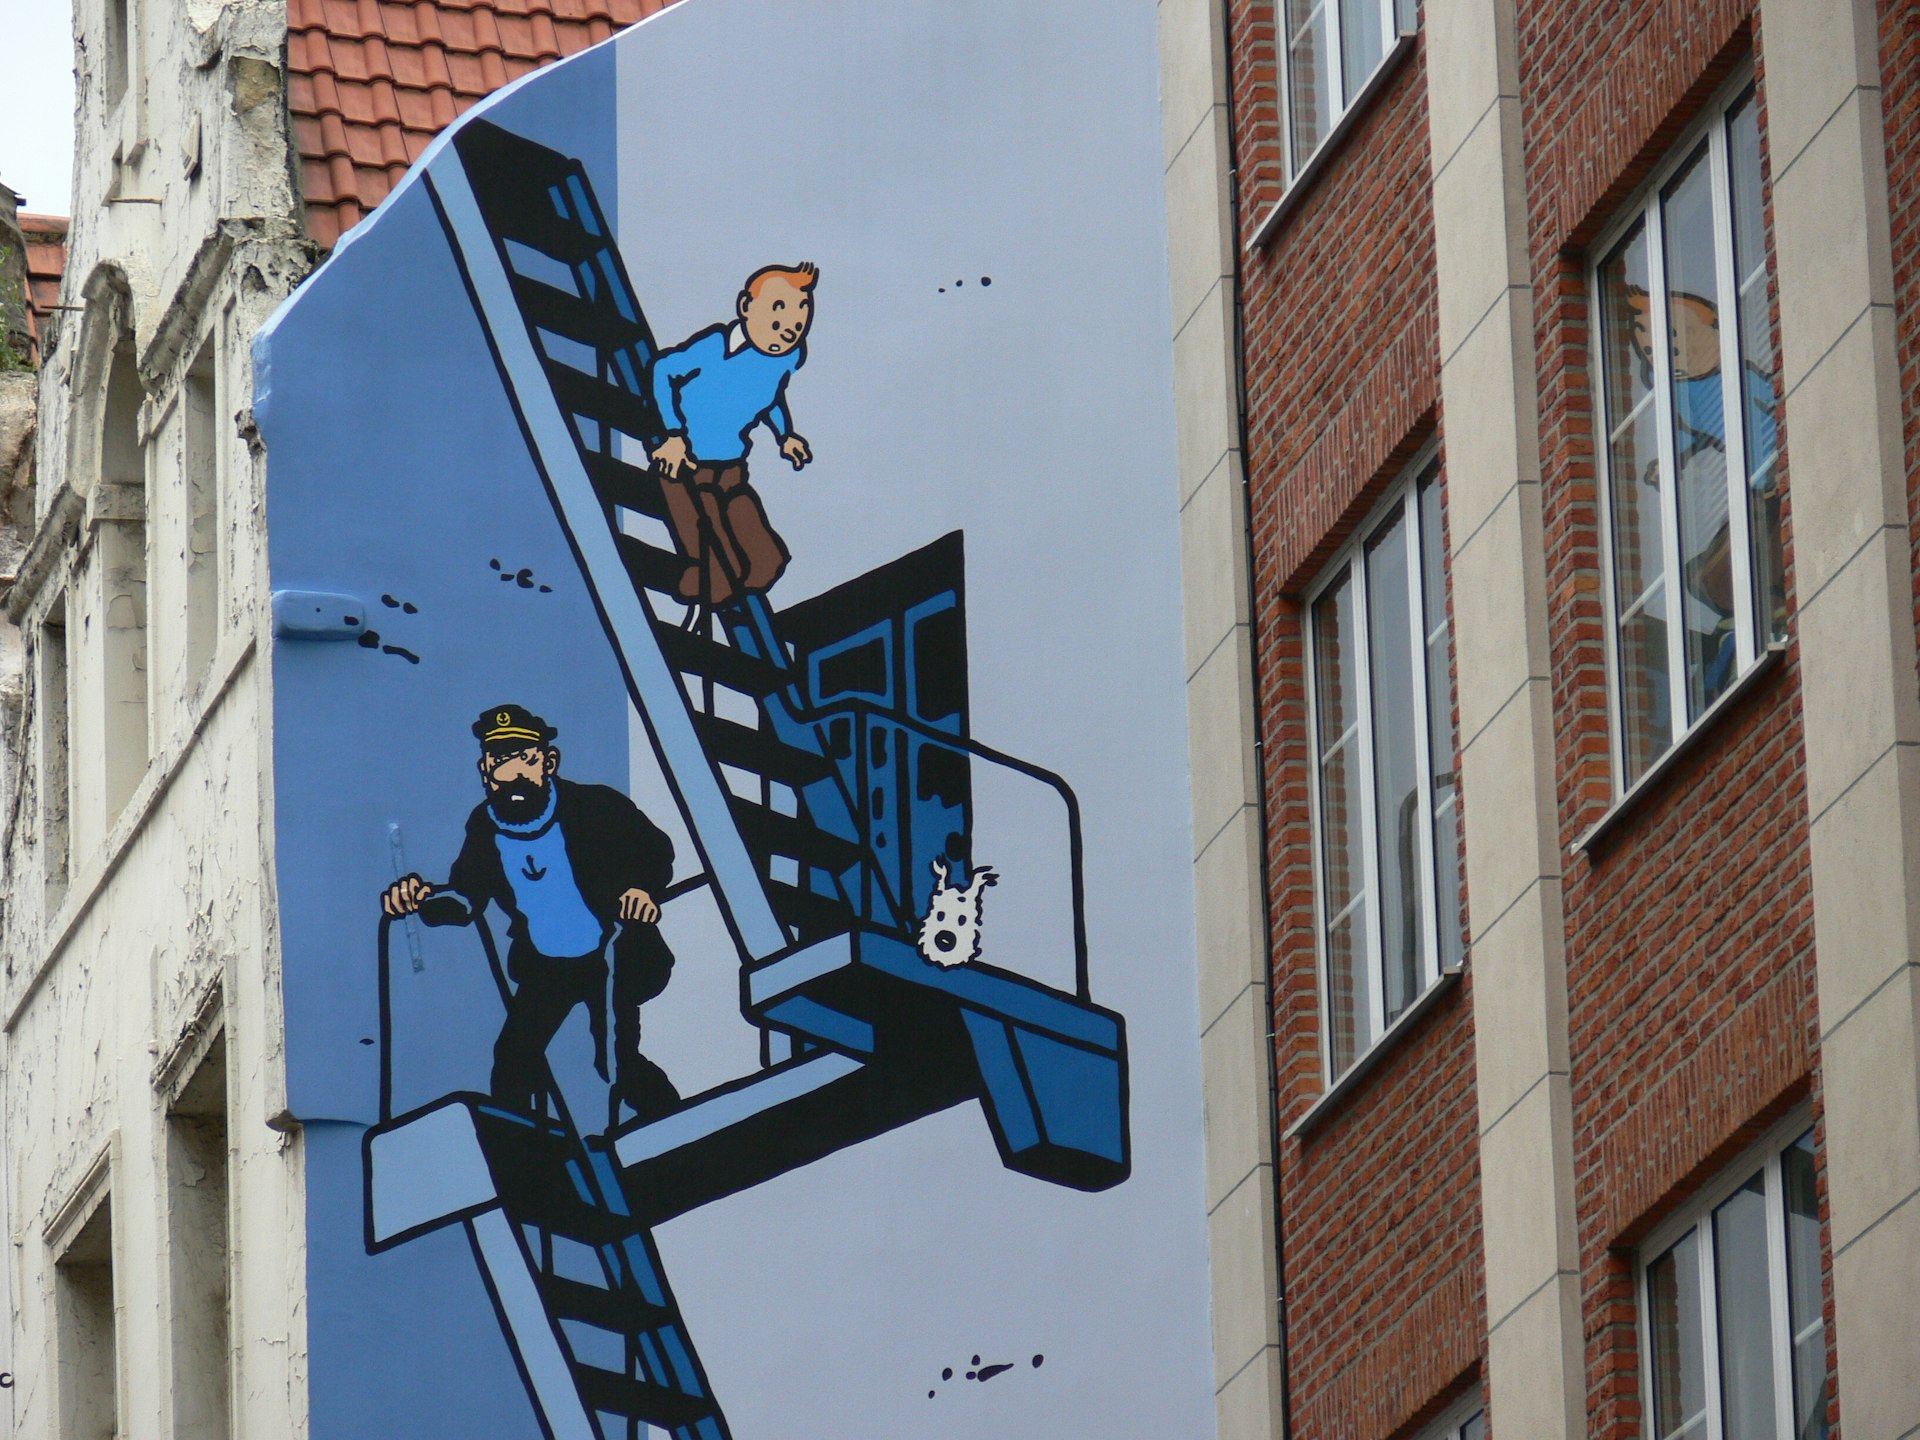 A Tintin mural on the comic book route in Brussels, Belgium